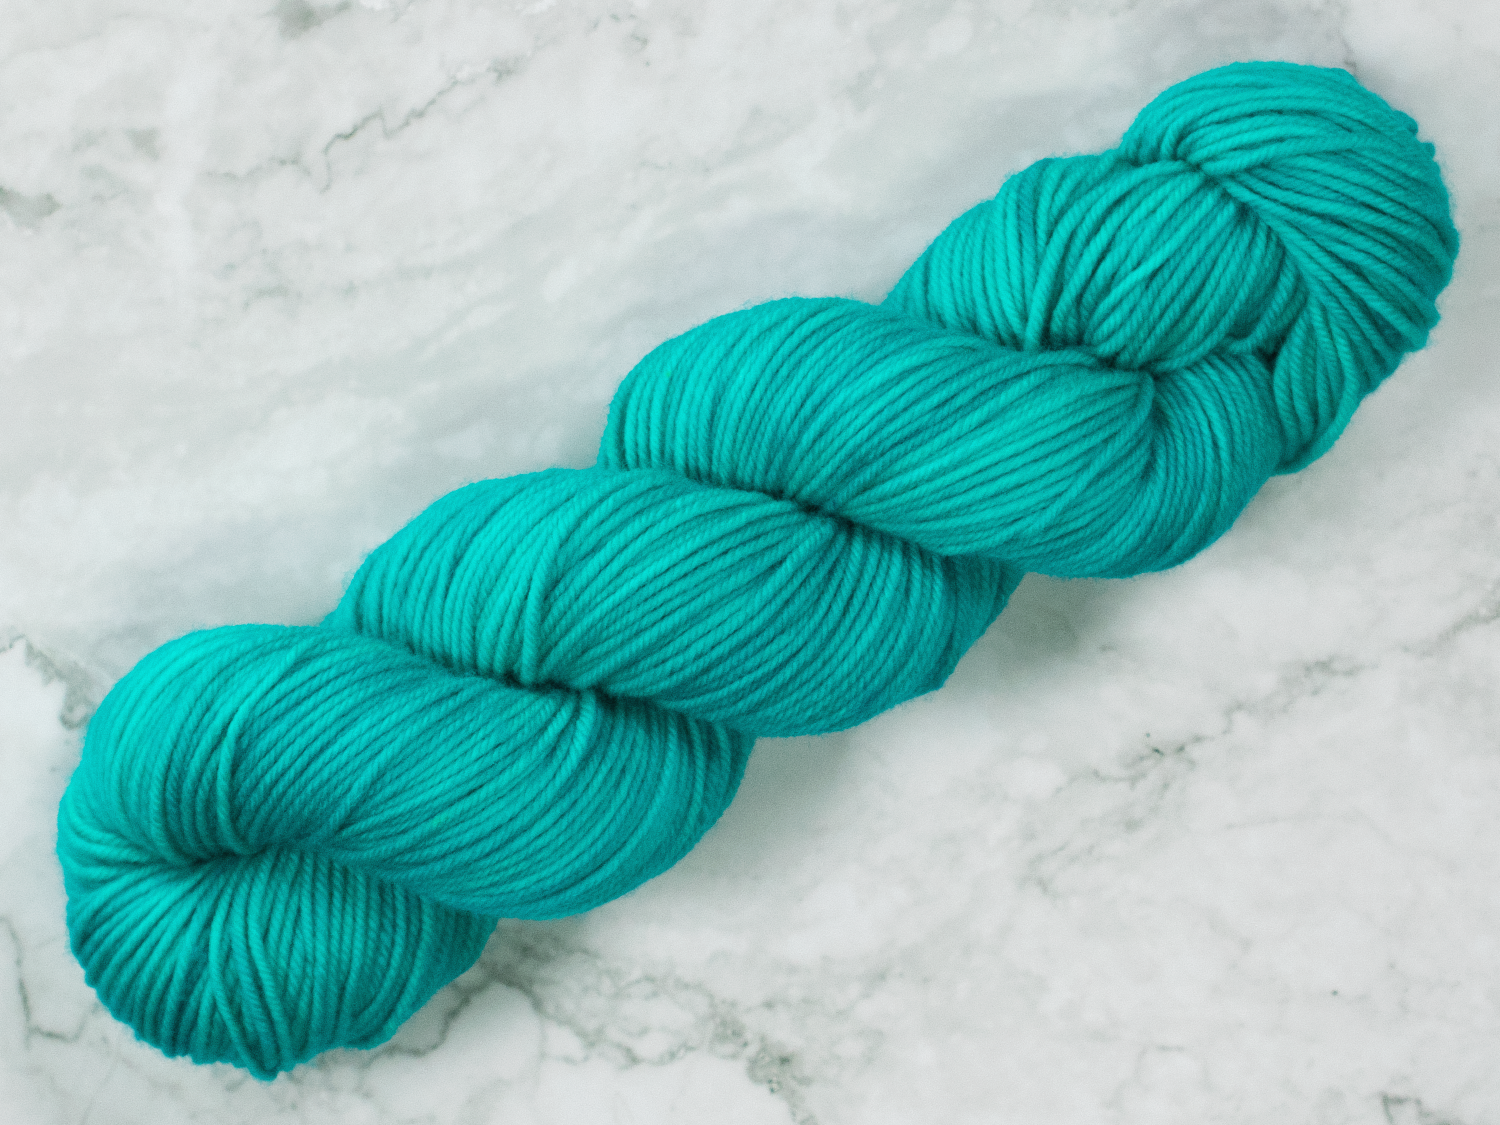 Photo of DK Weight yarn in "As Cold As Ice"